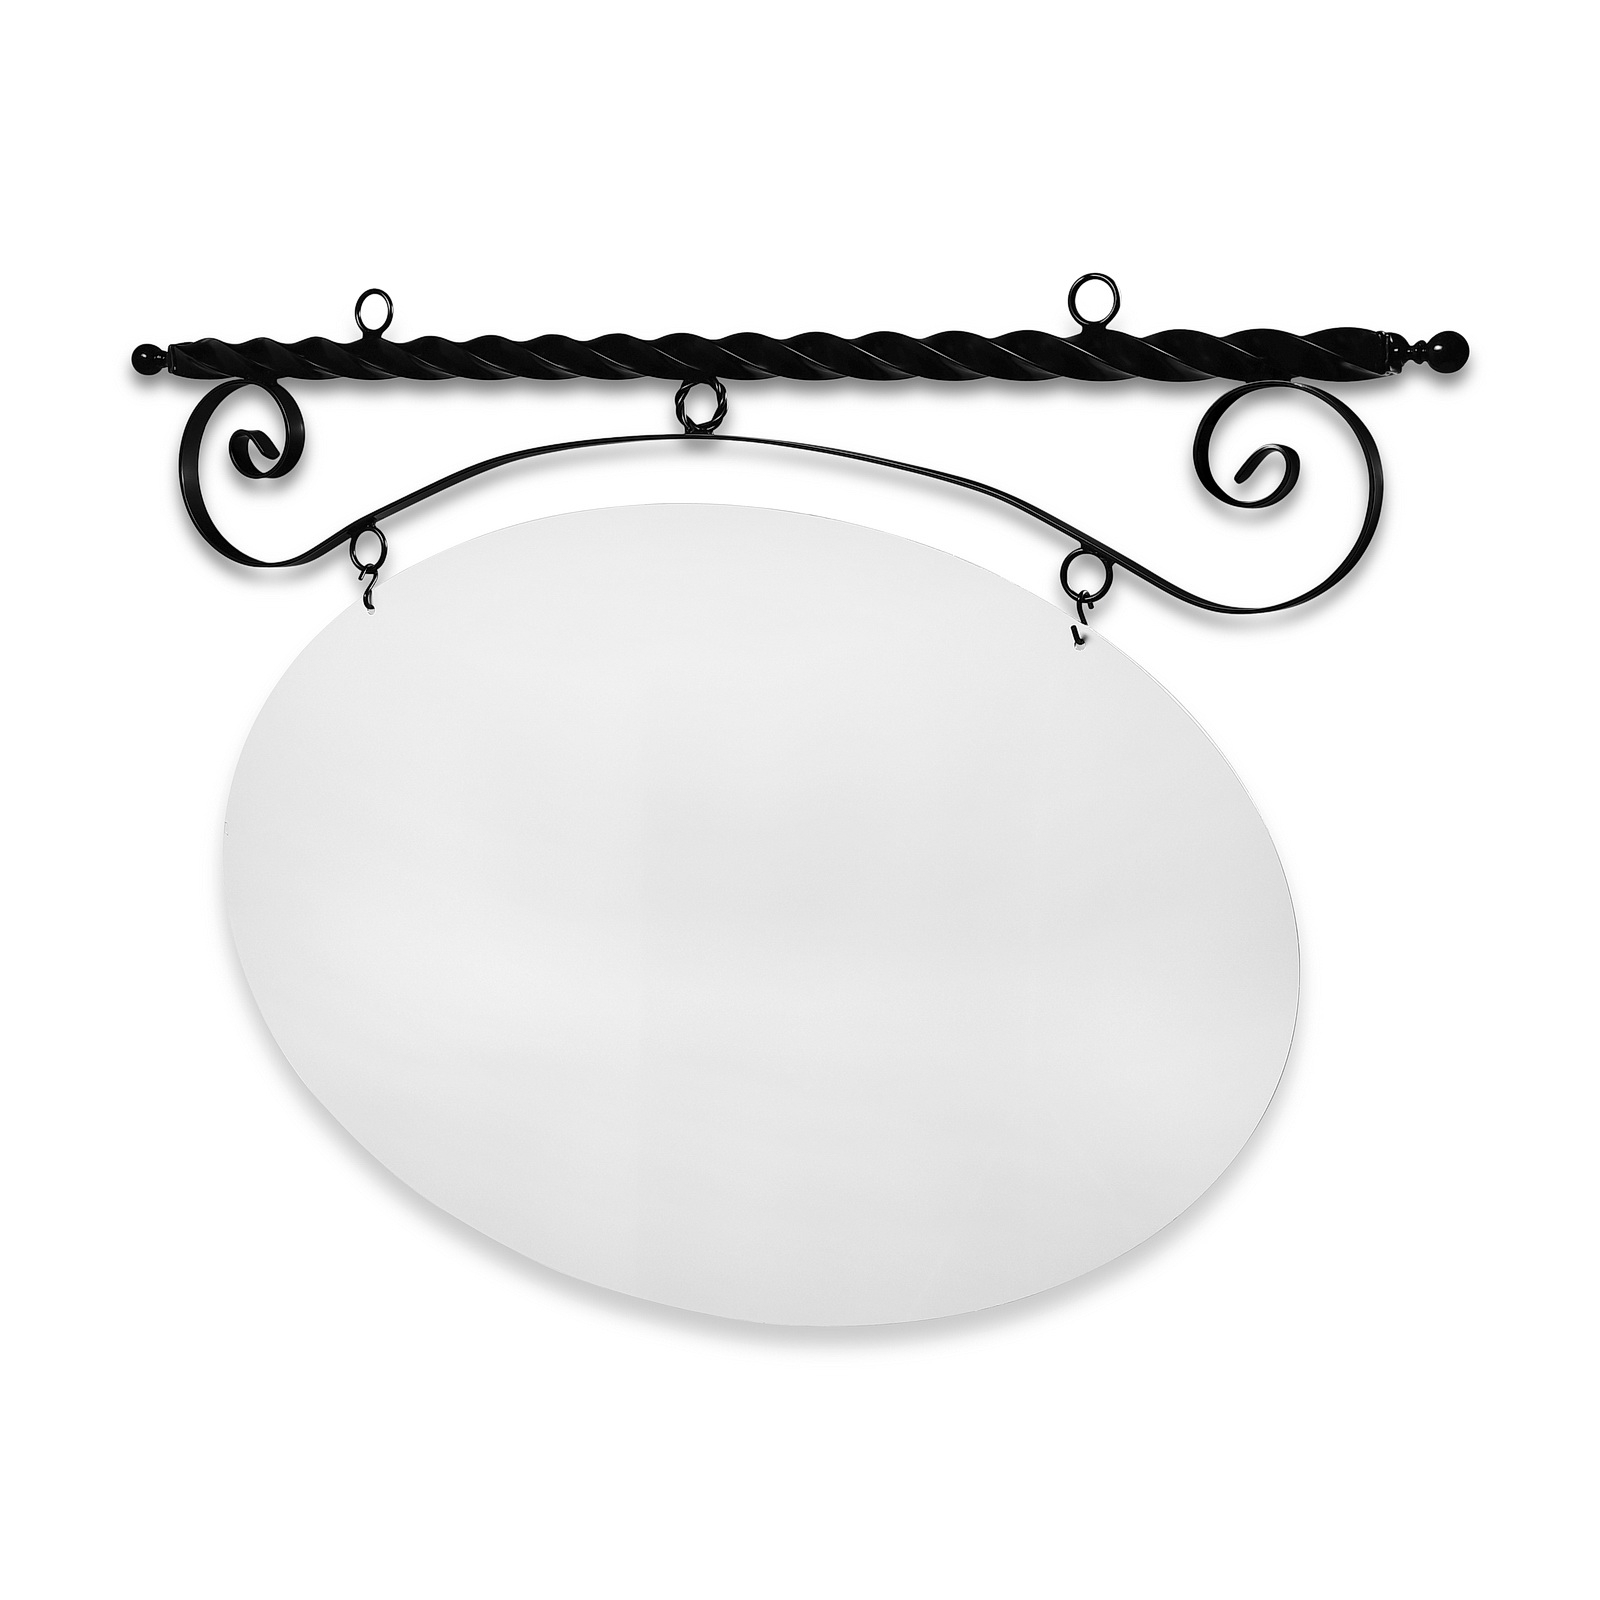 48'' Wide Ceiling Mount Bracket in  Black Powder Coated Steel with 30'' Tall X 46'' Wide X .080'' Thick White Aluminum Sign Blank and 2 Black Powder Coated S-Hooks (Ball Finial)